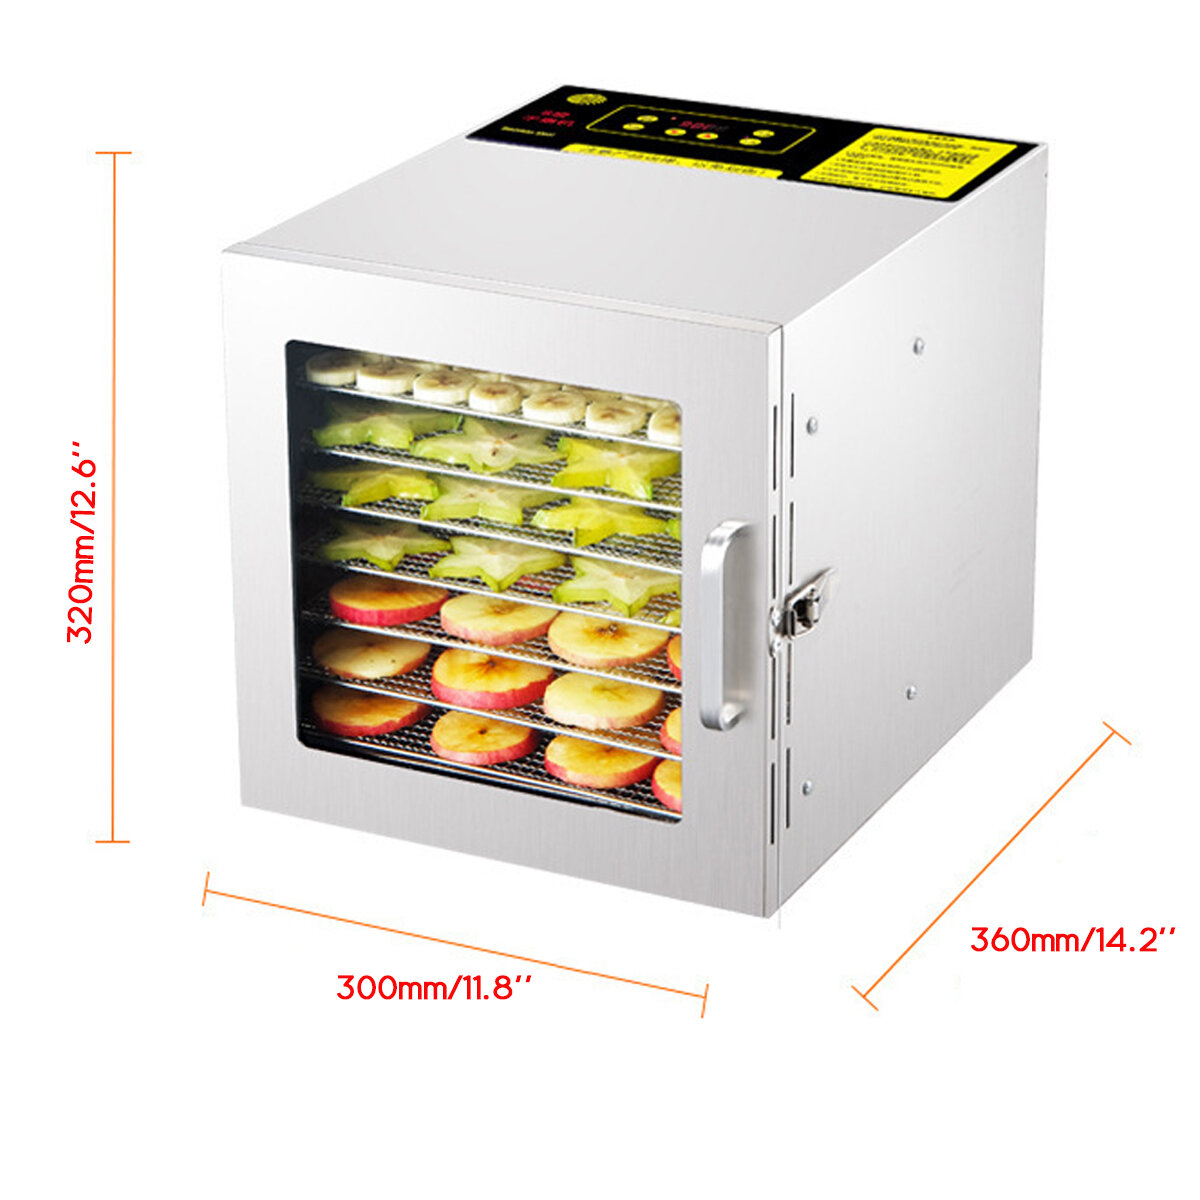 8 Layers Stainless Steel Fruit & Food Dehydrator Vegetable Meat Hot Air Dryer For Household/Commercial/DIY Food 600W 220V